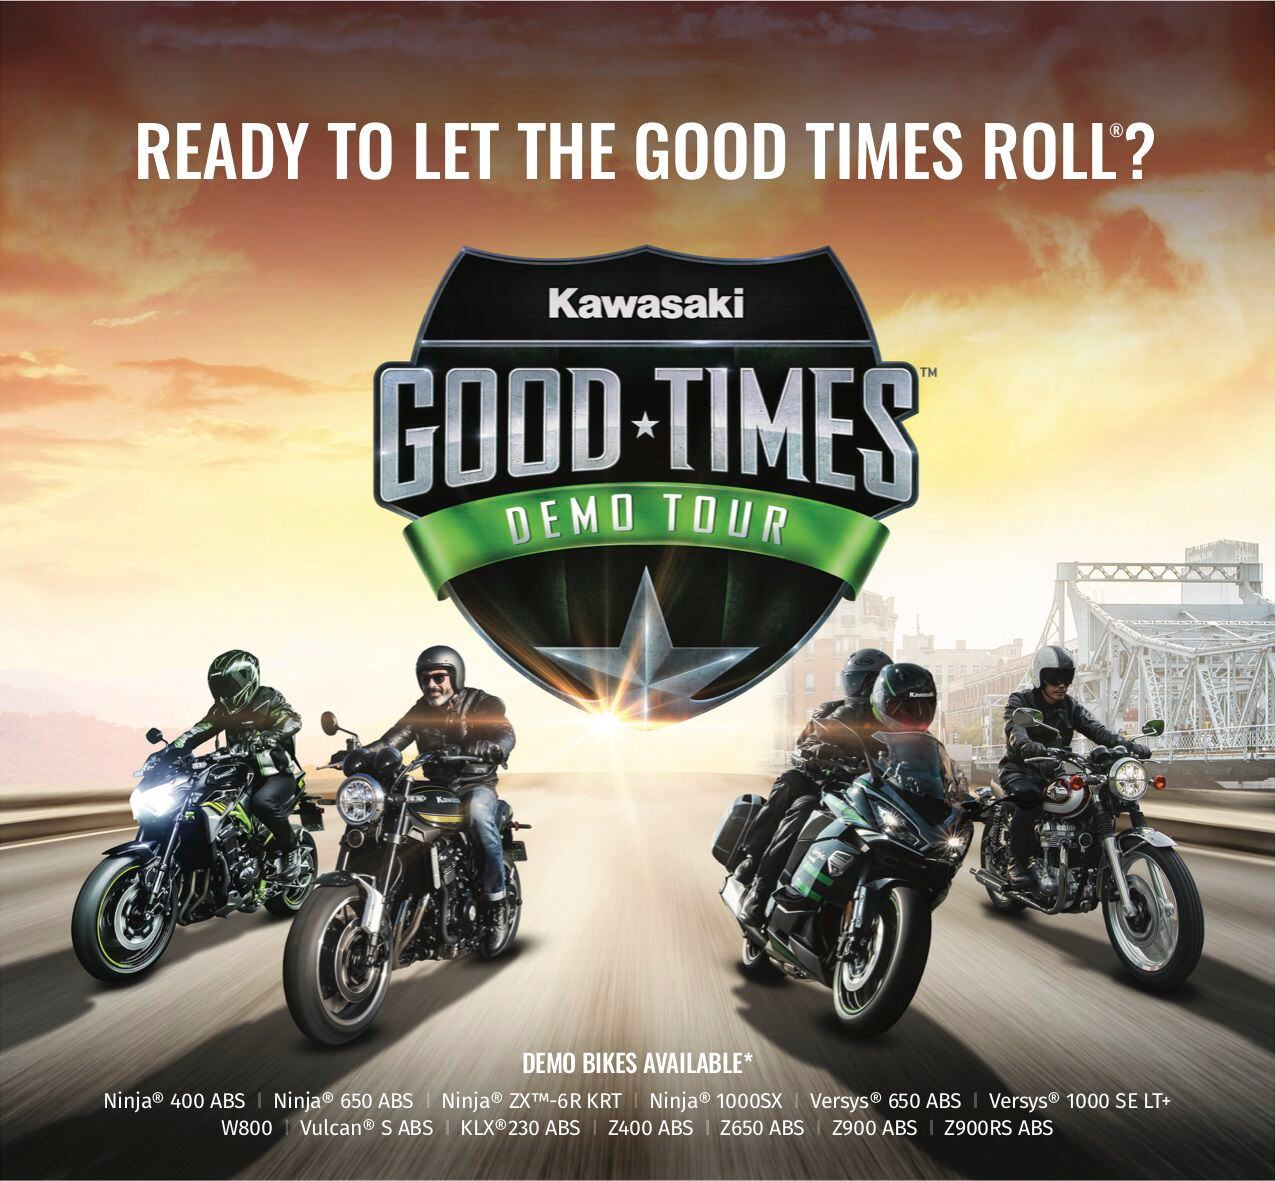 Kawasaki’s Good Times Demo Tour is starting its 2021 schedule this month.